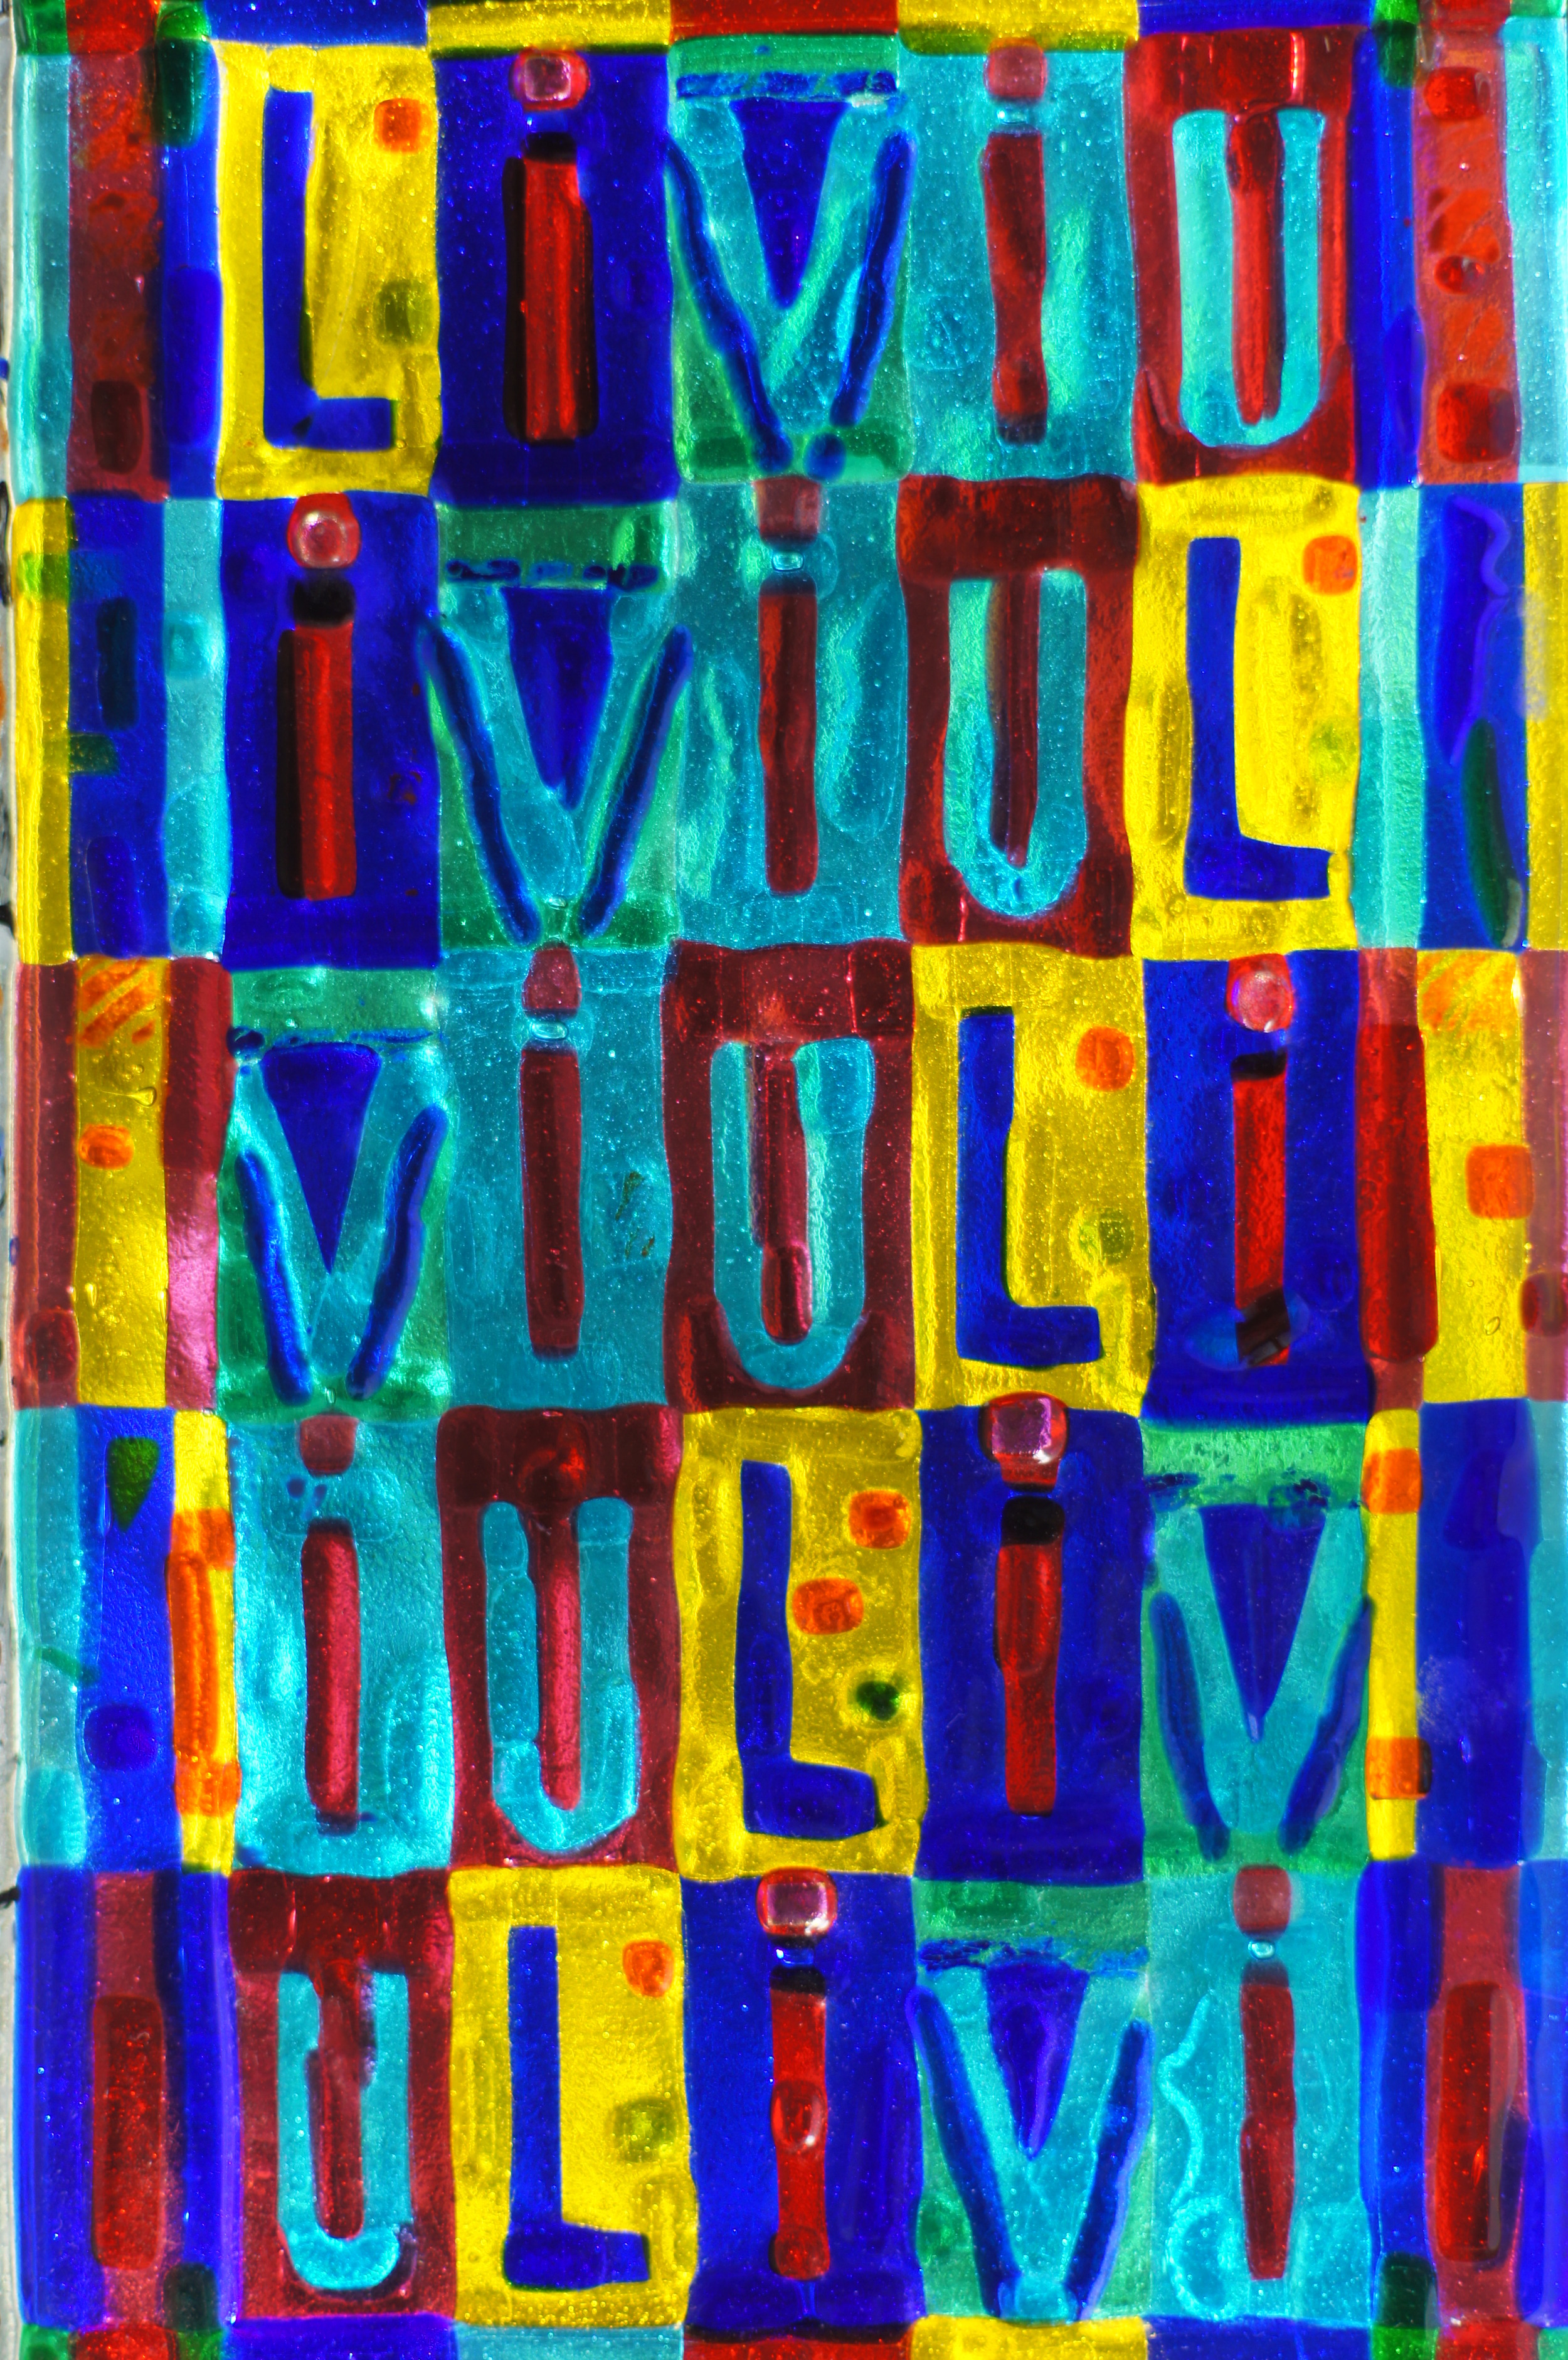   Play on the letters 'Liviu,' which are rotated around.&nbsp;    2010    Fused glass.  